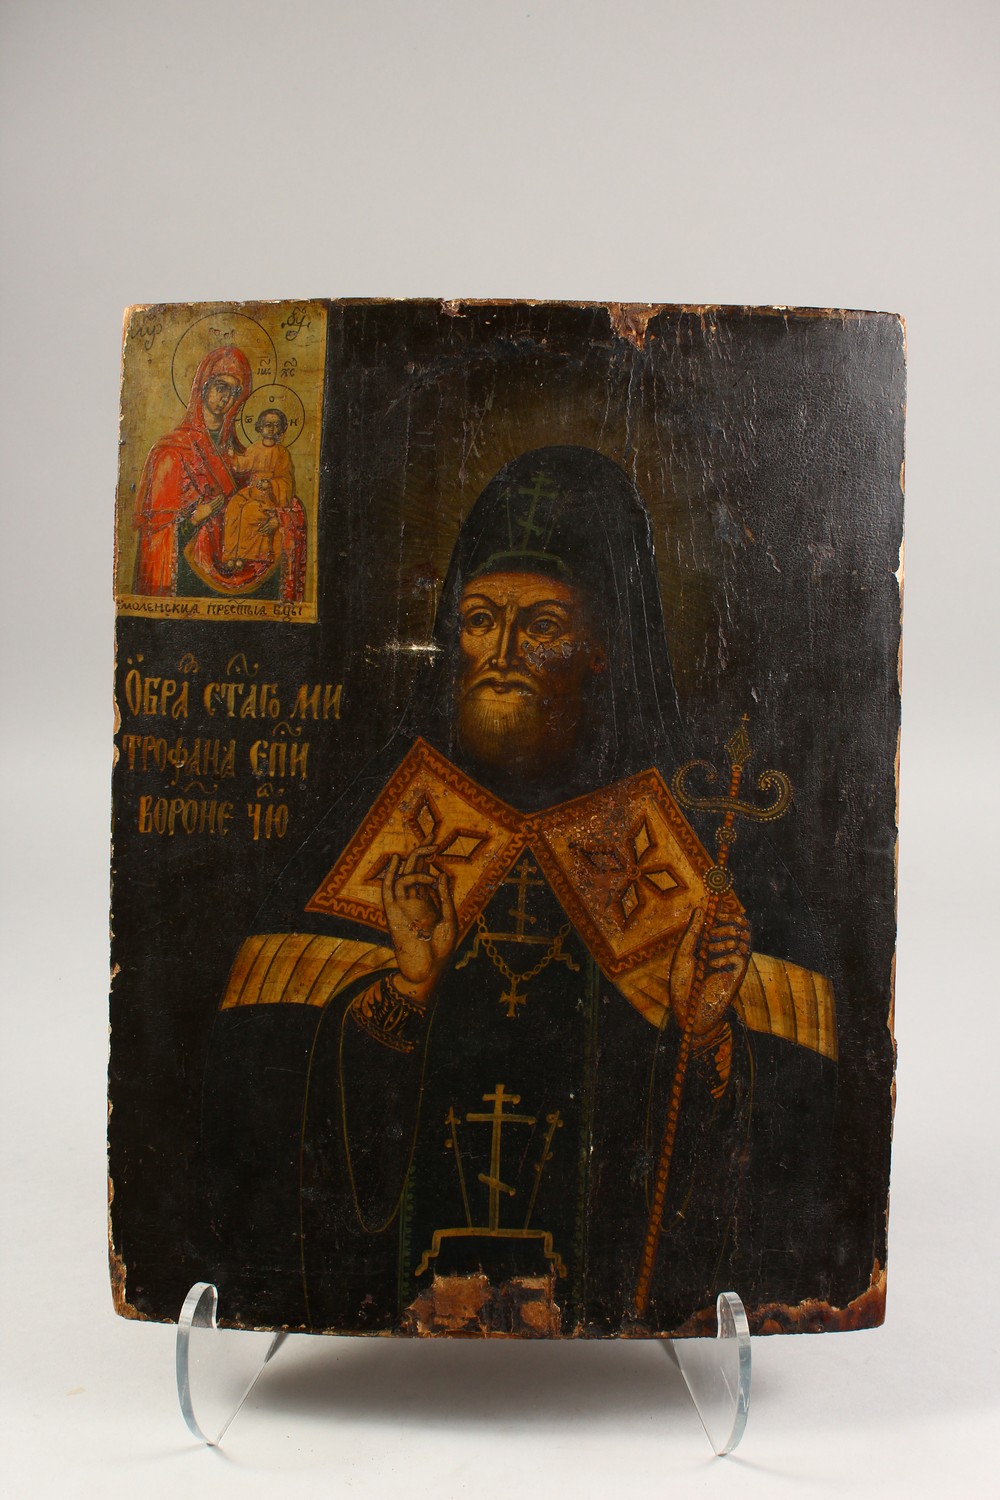 A RUSSIAN ICON. SAINT MITROFAN OF VORONEZH (1623-1703), on wood. See label on reverse. 15.5ins x - Image 10 of 10